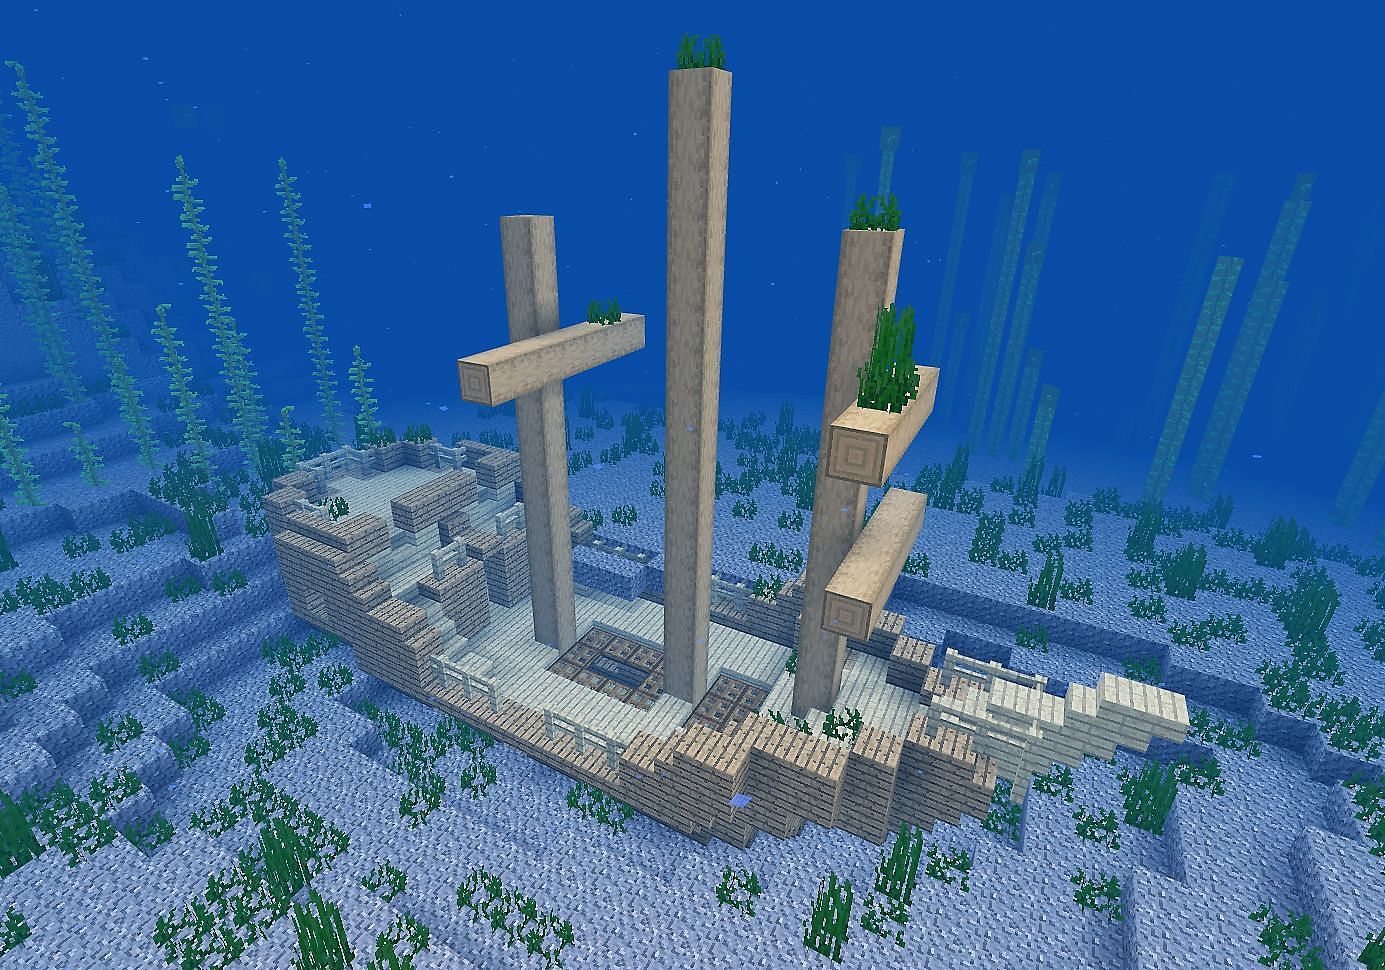 There&#039;s a shipwreck near spawn in this Minecraft world (Image via Mojang)